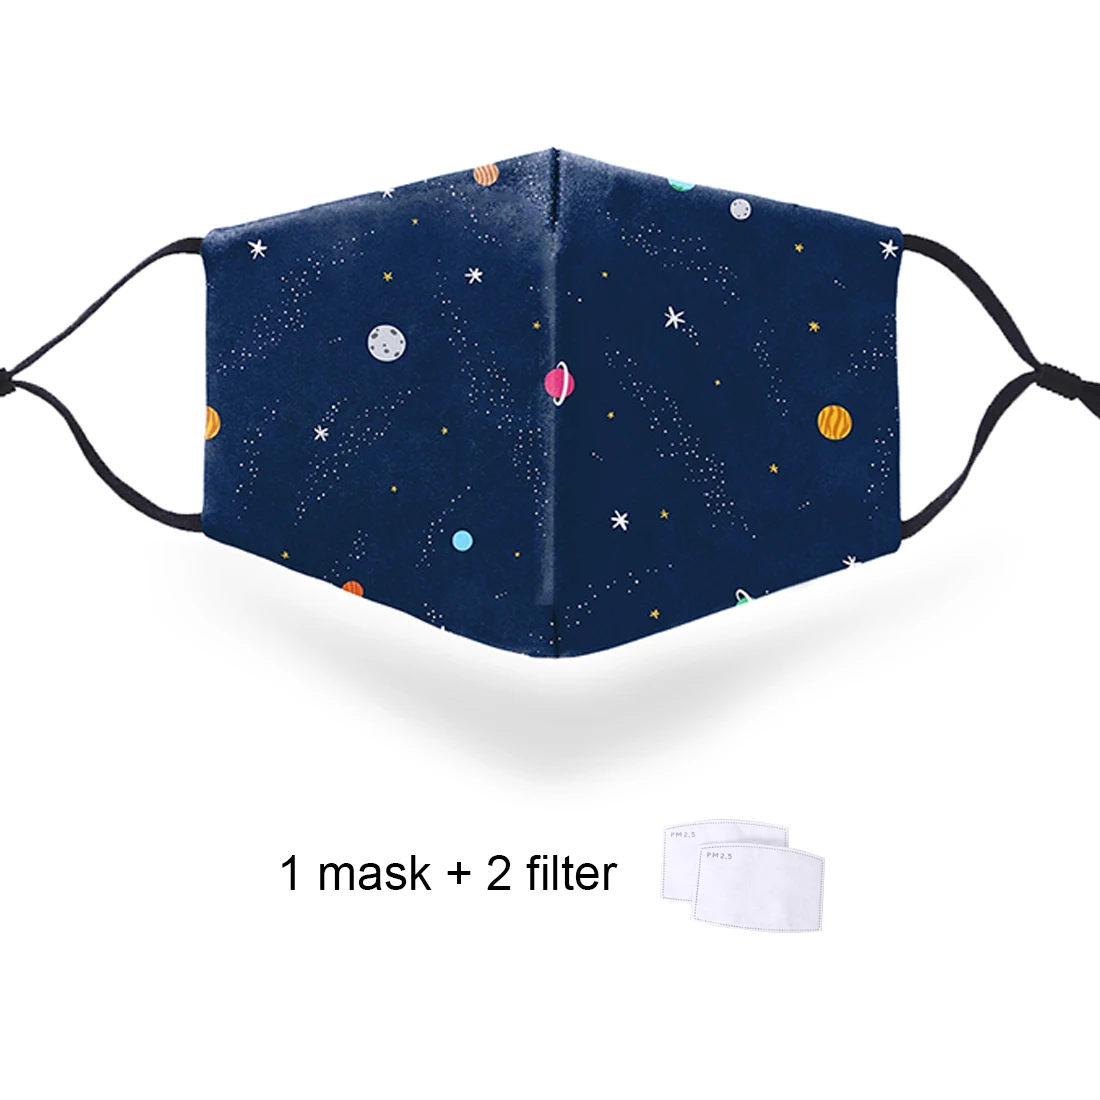 

Unisex Funny 3D Stars Print Anti Dust Masks Protective Replaceable PM2.5 Filter Masks Fashion Reusable Dustproof Mouth Muffles